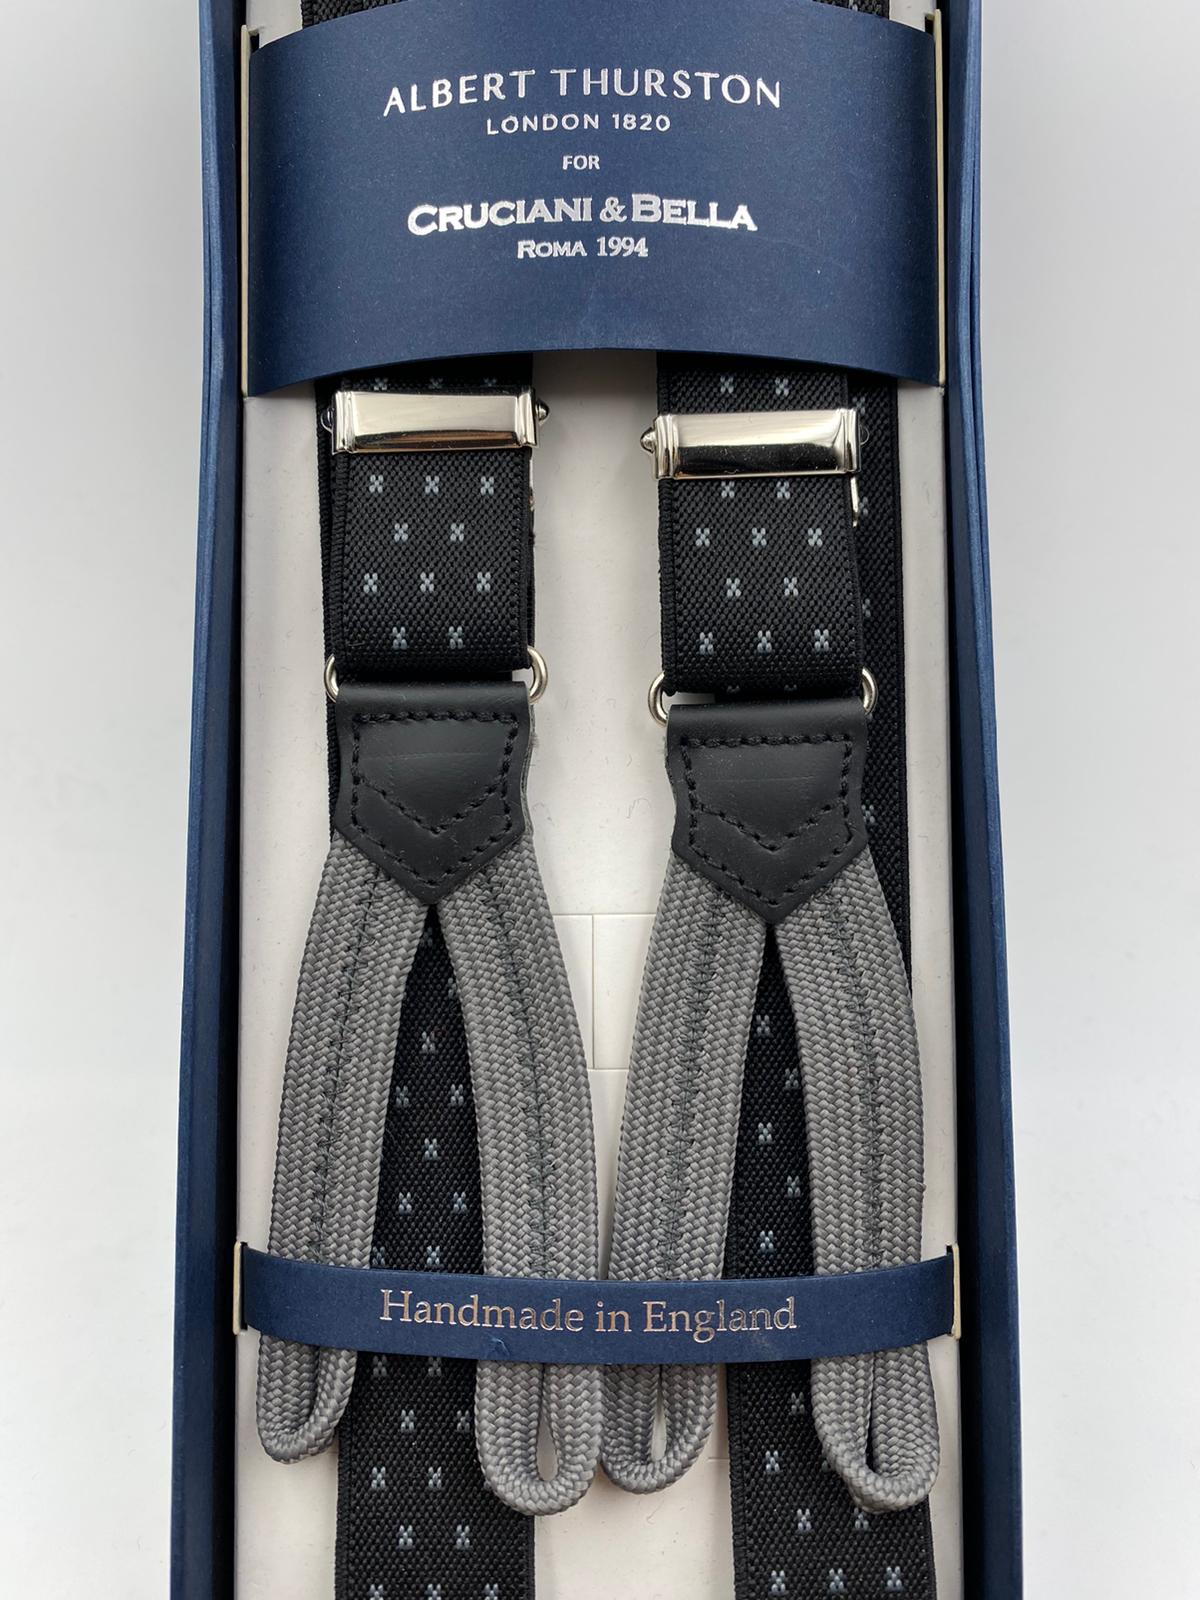 Albert Thurston for Cruciani & Bella Made in England Adjustable Sizing 25 mm elastic braces Black and Grey Motif Braid ends Y-Shaped Nickel Fittings Size: L #4266